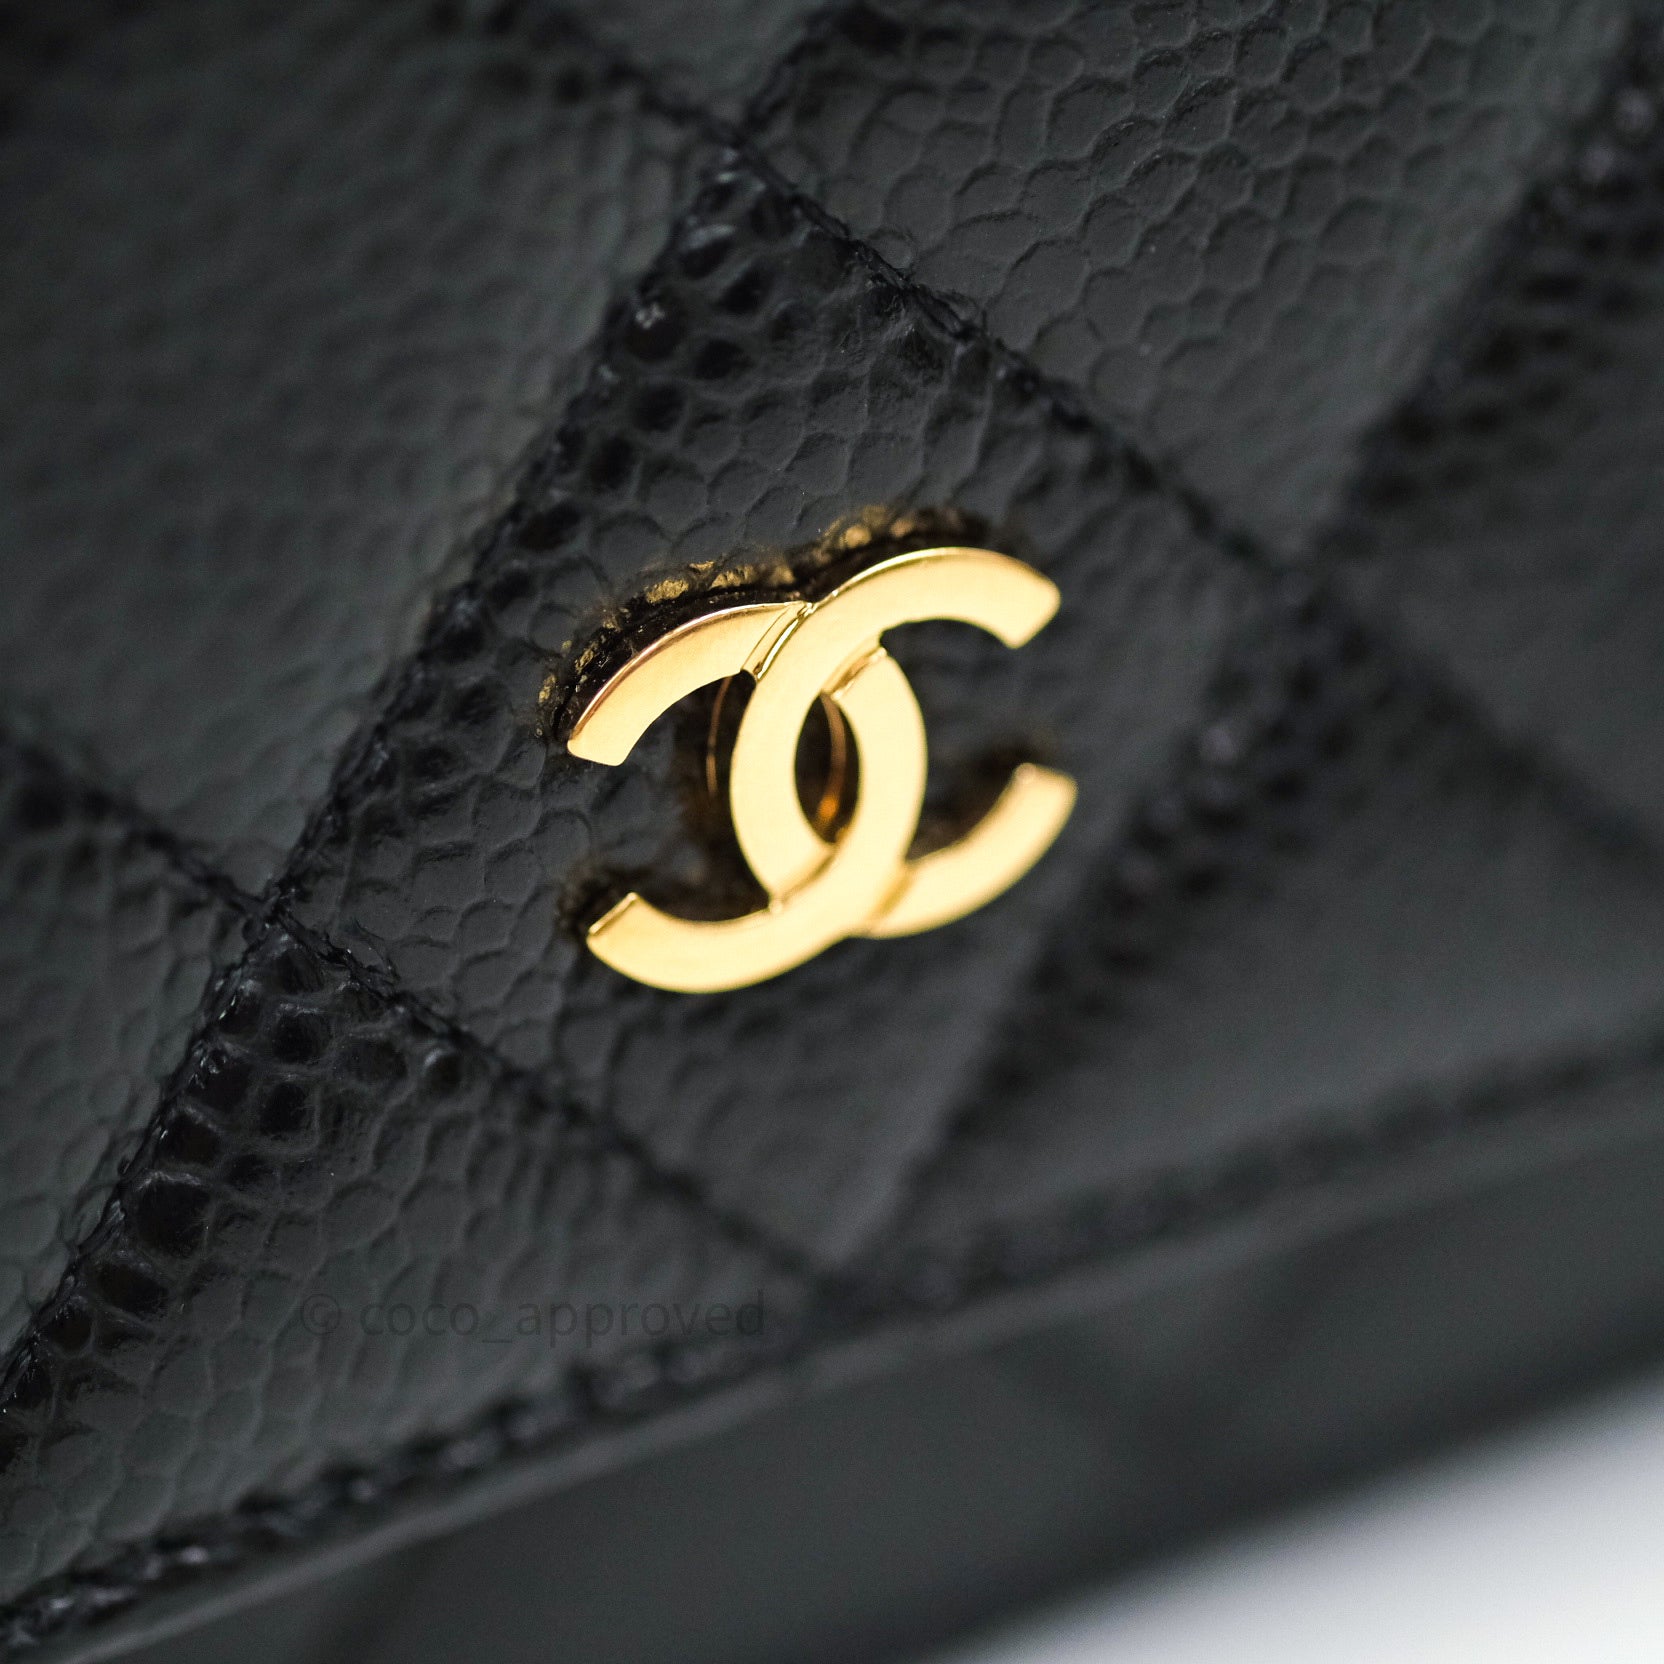 CHANEL Caviar Quilted Coco Candy Wallet On Chain WOC Black 1219574